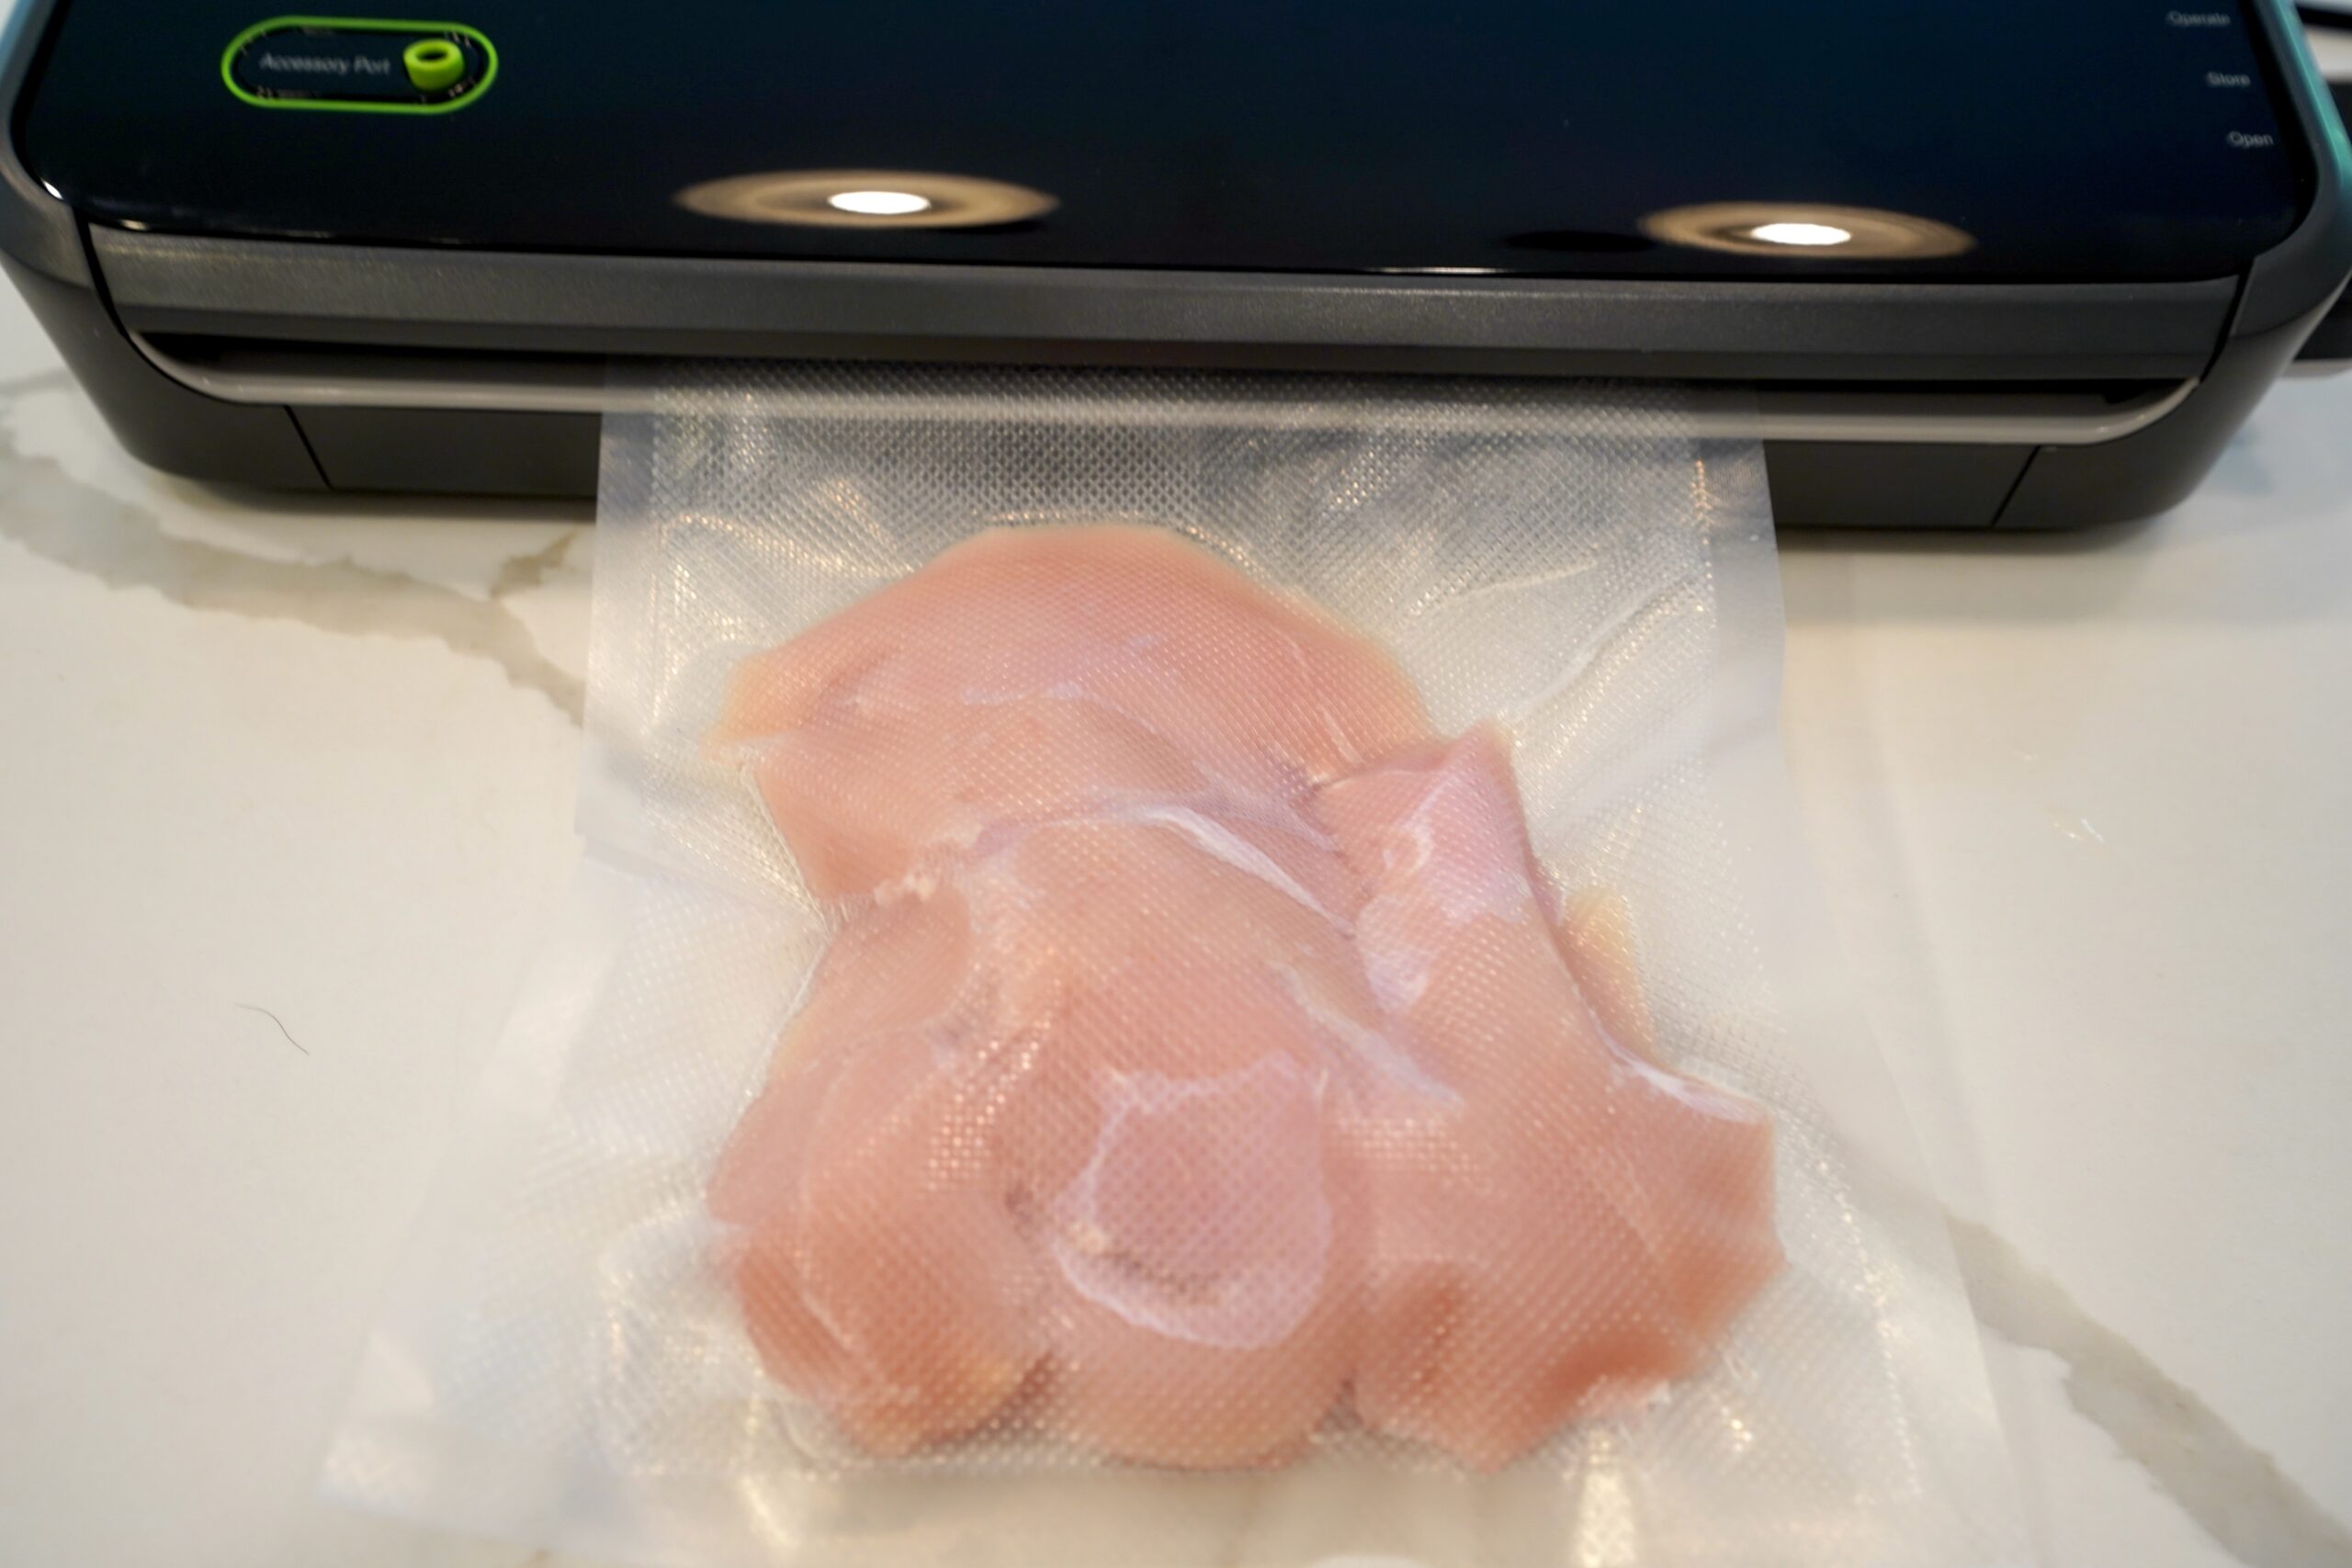 How to Seal Liquids and Marinades in Vacuum Sealed Bags